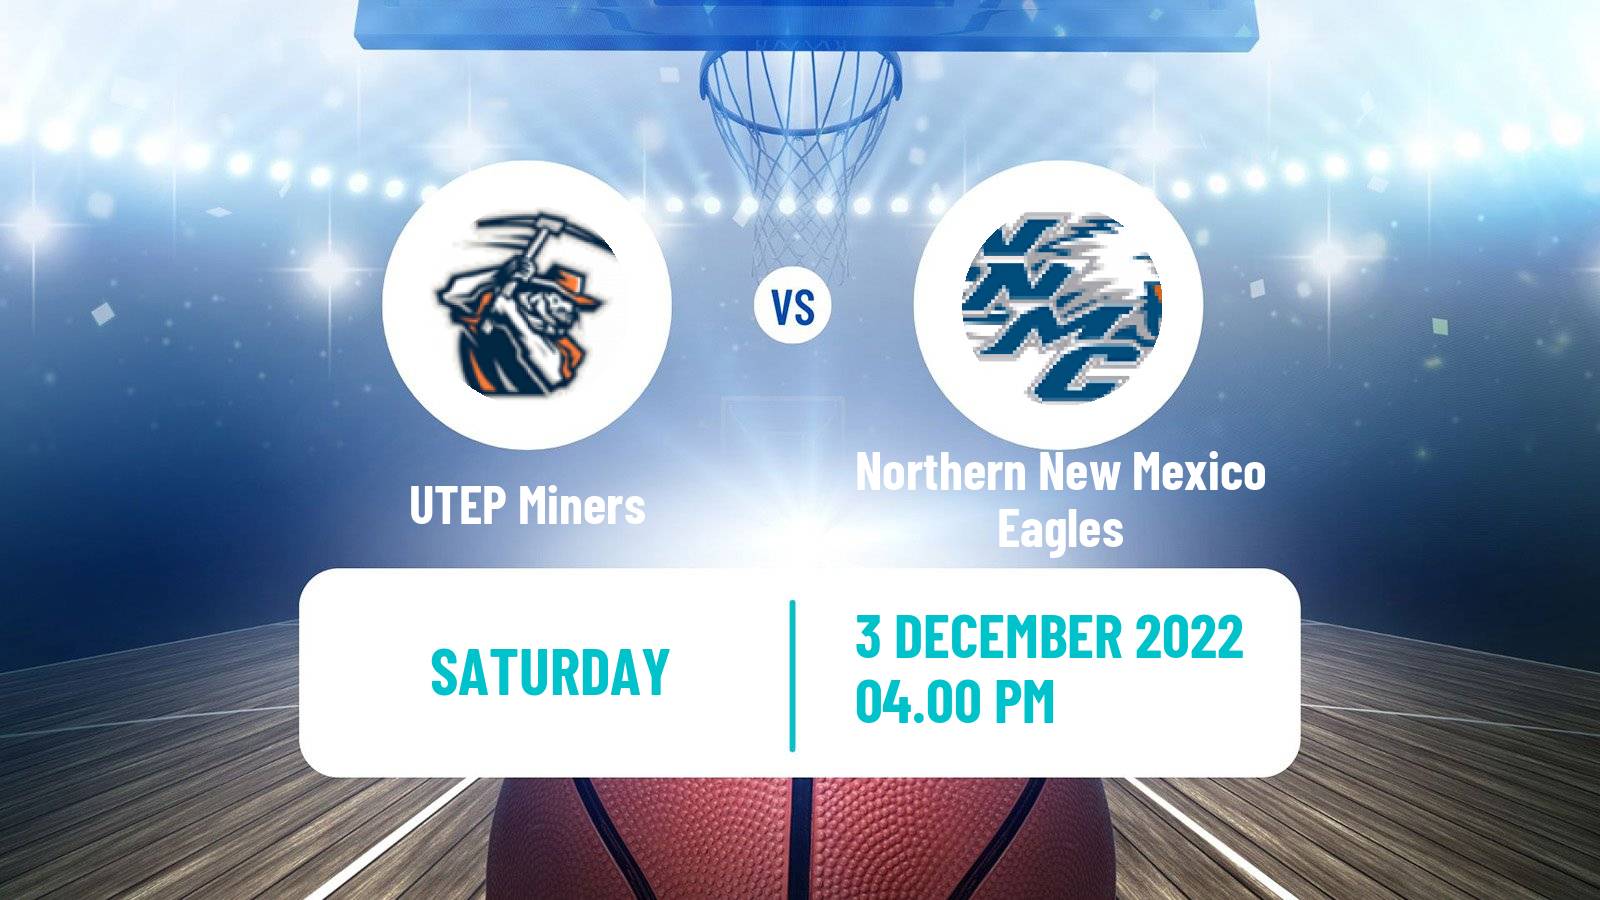 Basketball NCAA College Basketball UTEP Miners - Northern New Mexico Eagles